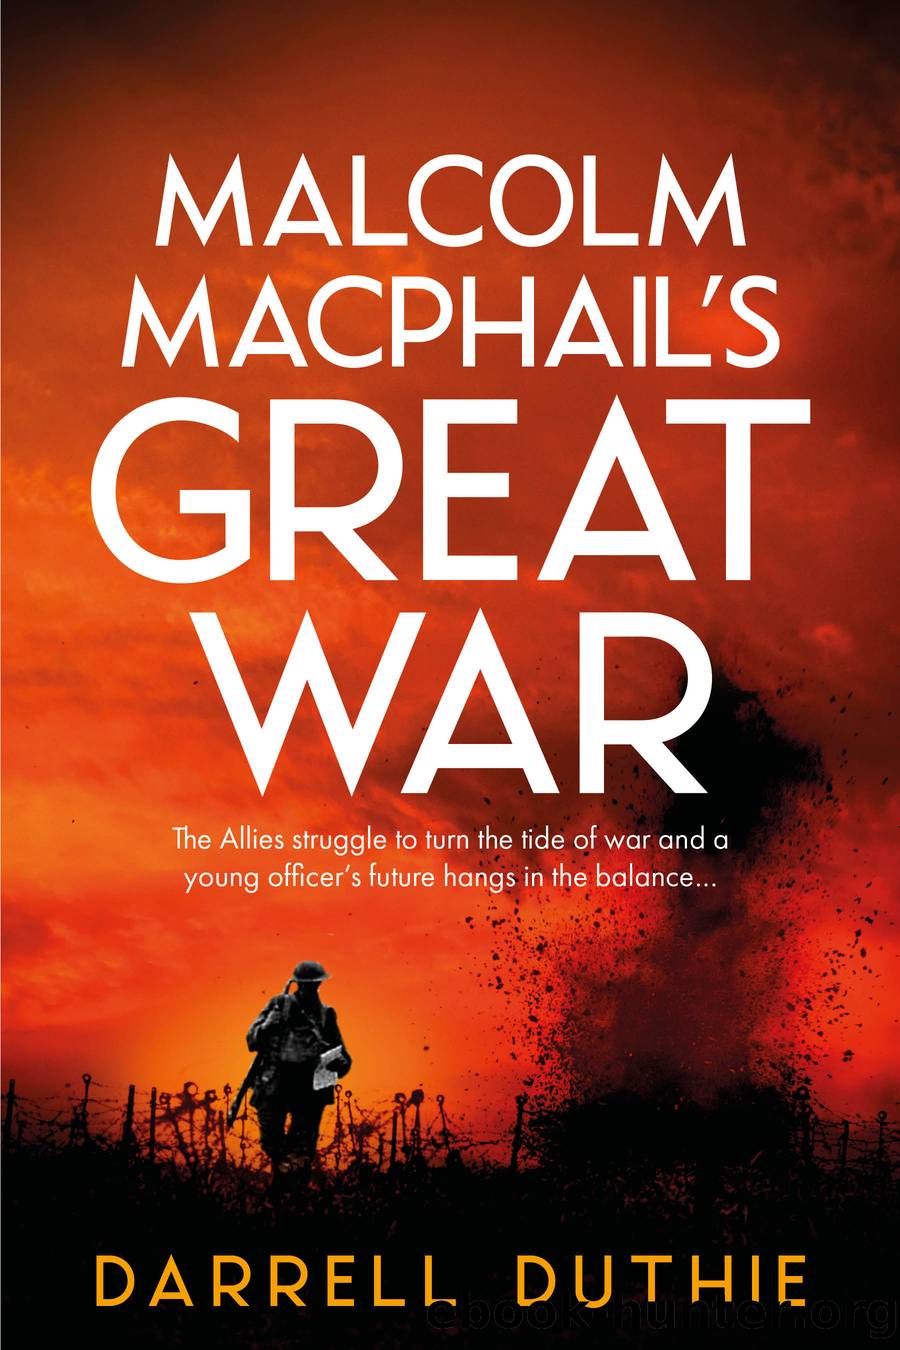 Malcolm MacPhail's Great War by Darrell Duthie